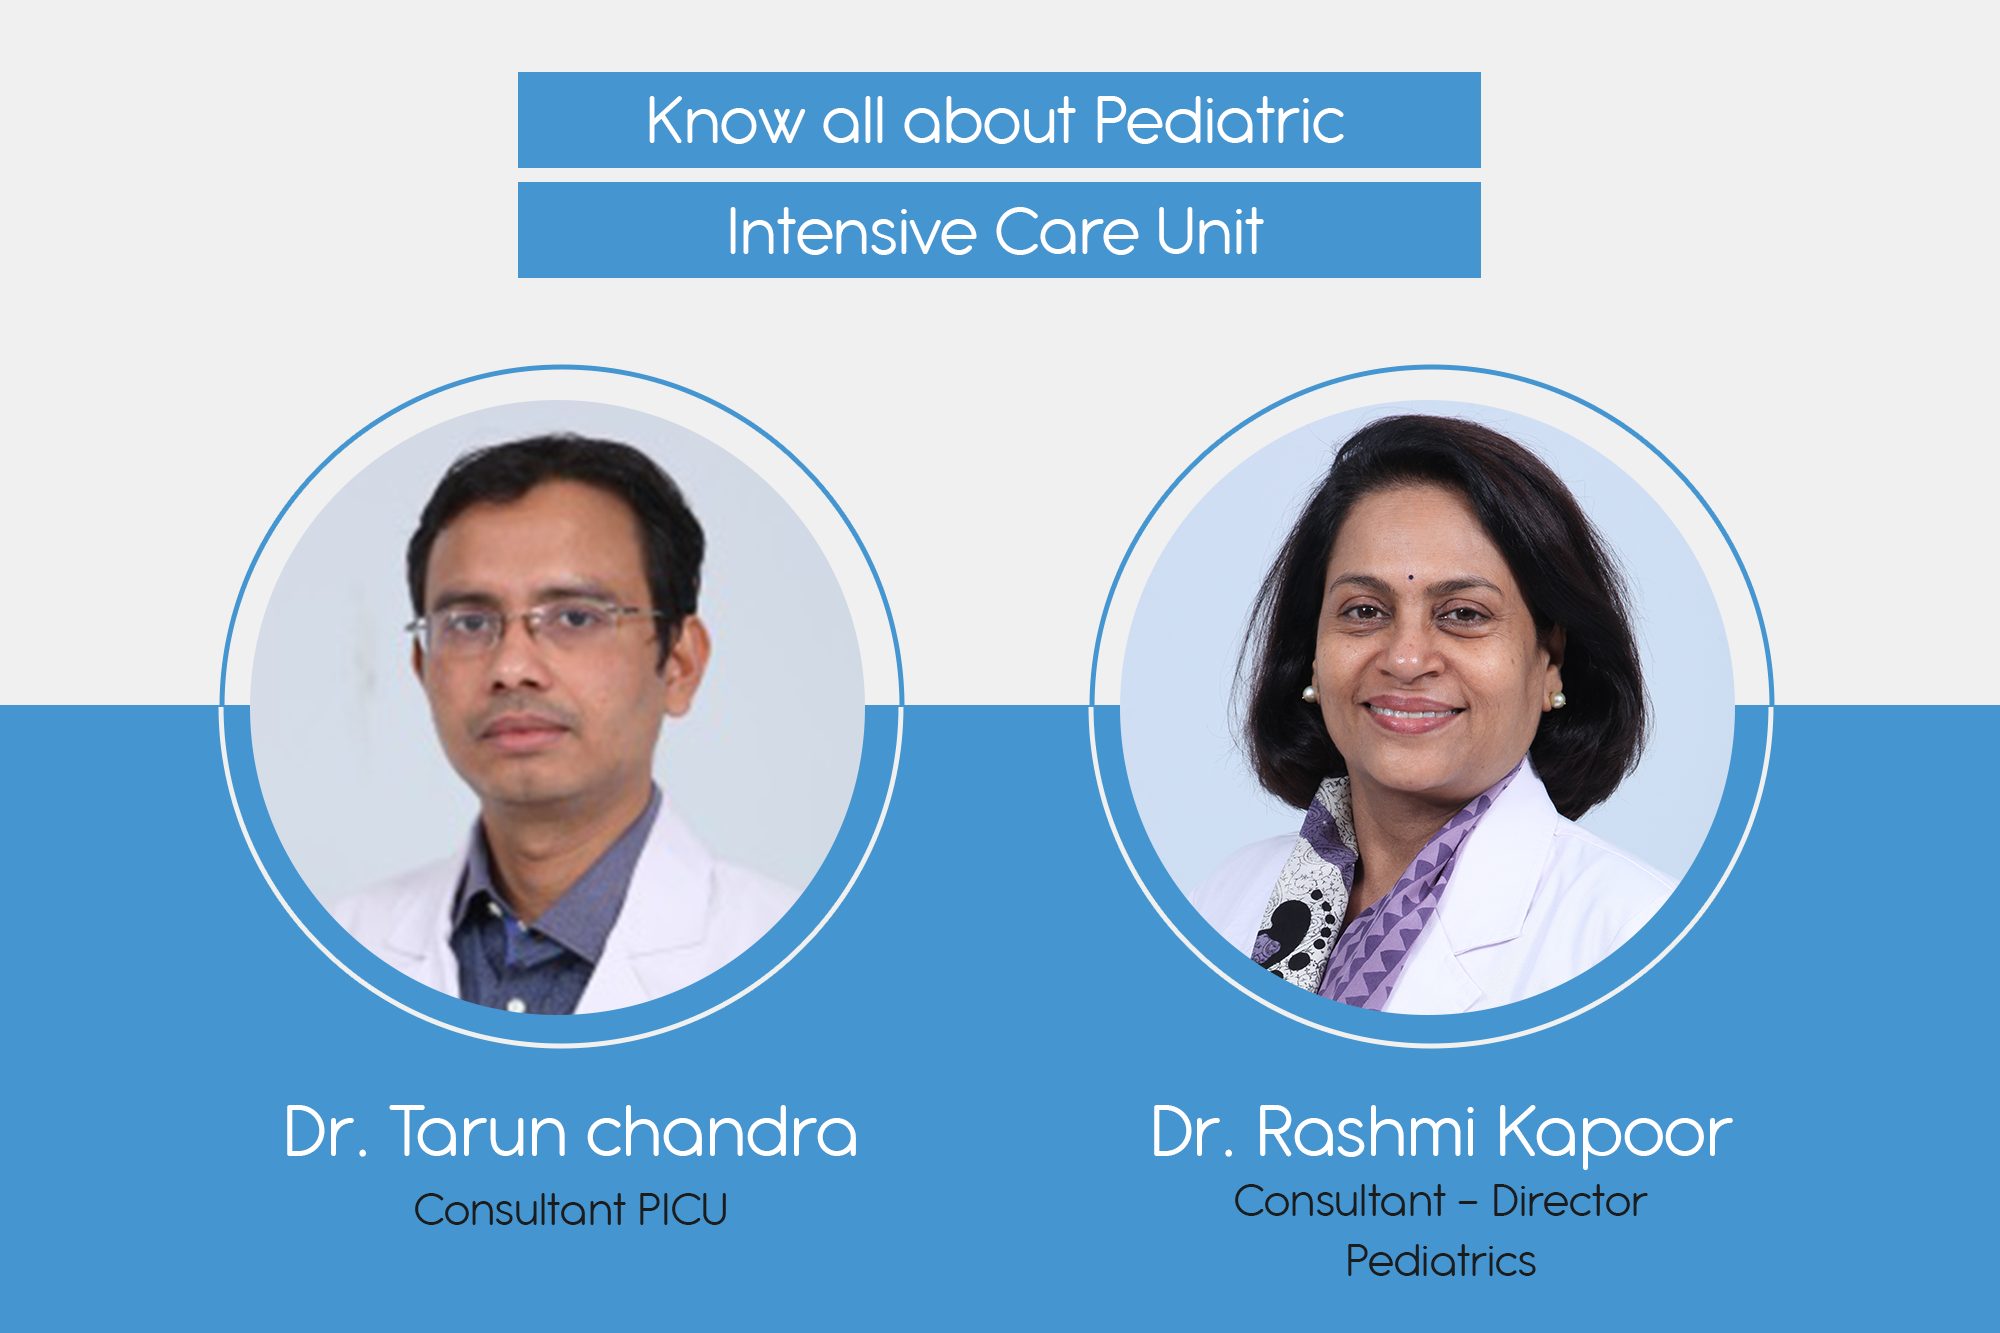 Know all about Pediatric Intensive Care Unit